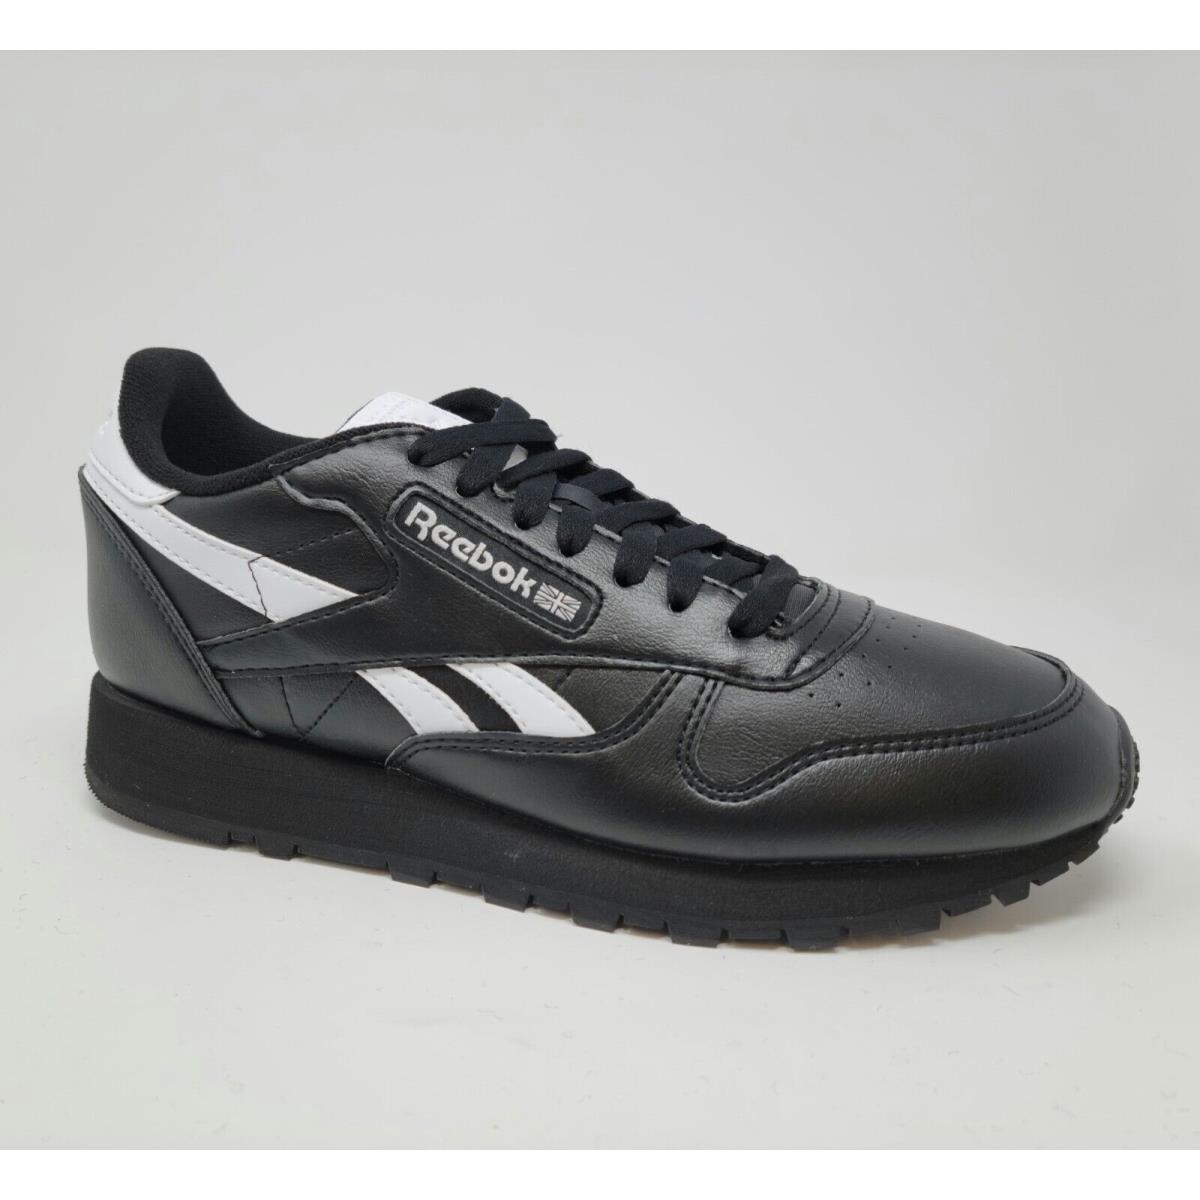 Reebok shoes Classic Leather - Black 0